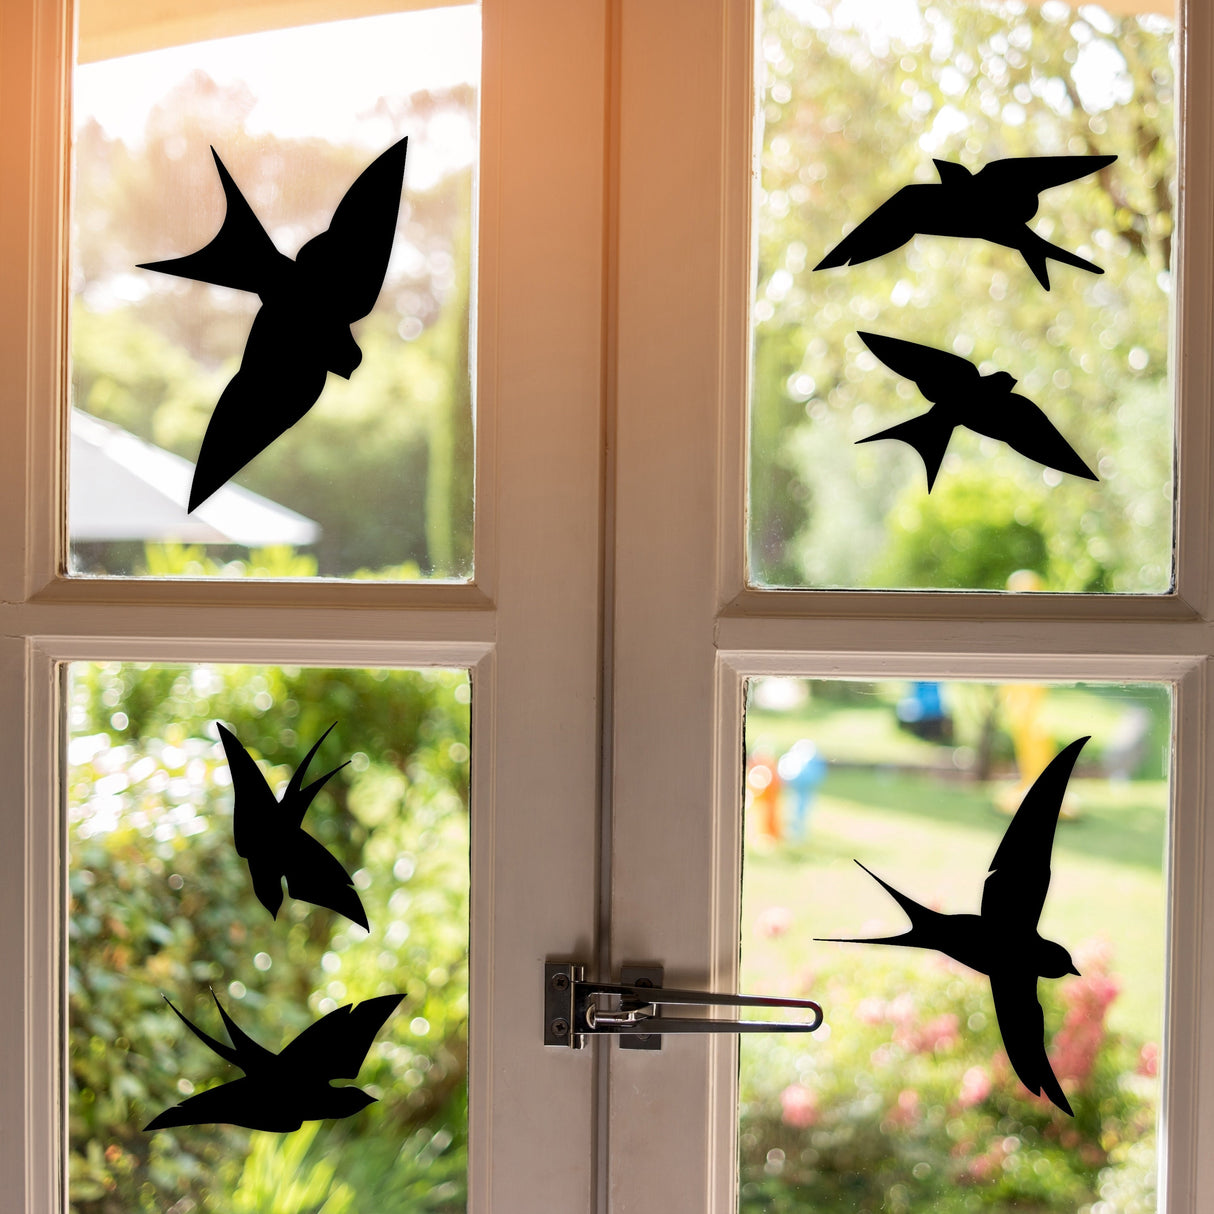 50% OFF - 25-Pack Black Bird Deterrent Window Decals - Anti-Collision Cling Stickers - Safety Glass Protector Prevents Bird Strikes 8" size